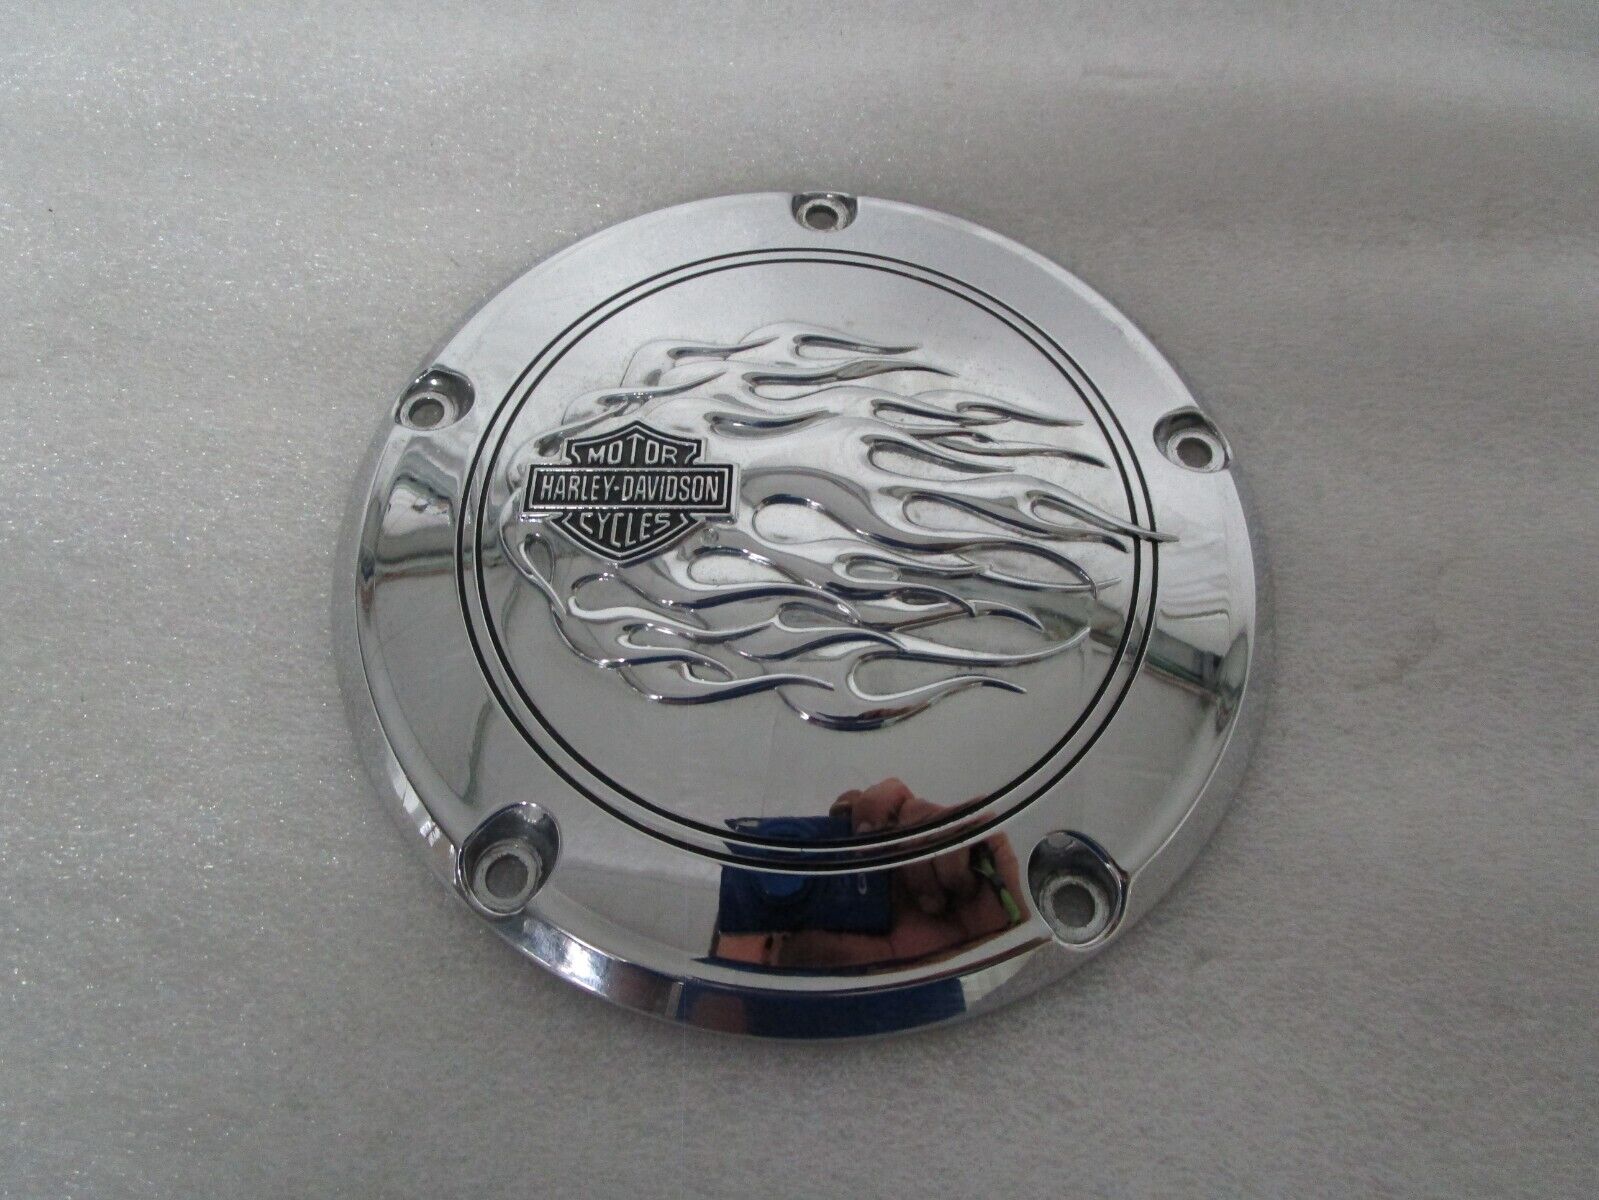 99-17 Harley Davidson Softail Dyna Touring Chrome Flames Collection Derby Cover